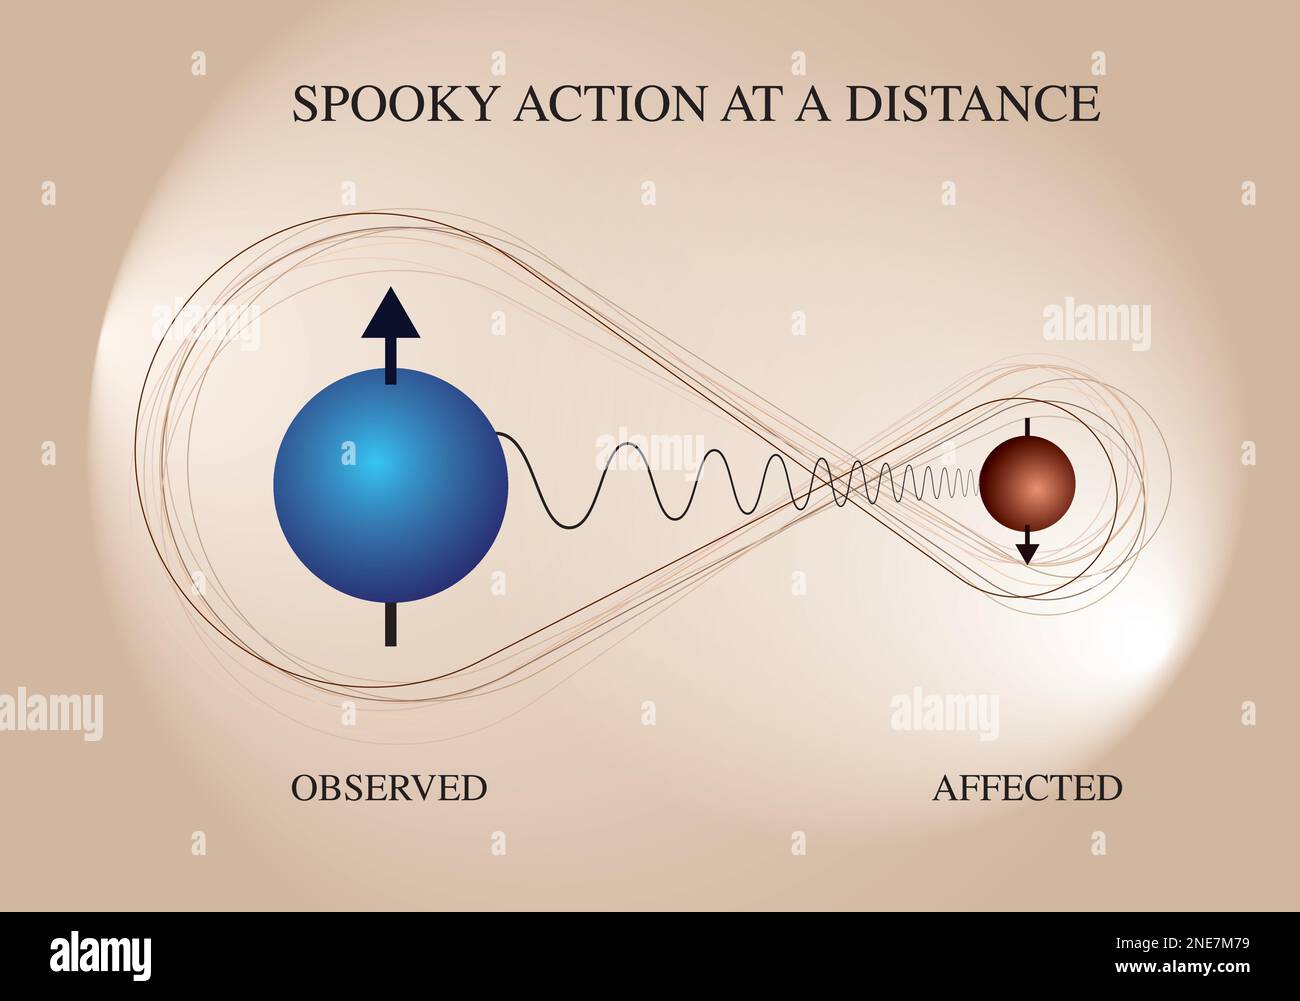 The concept of quantum entanglement. Position, momentum, spin, and polarization all share coherence in a quantum state. Spooky Action at a Distance. Stock Vector